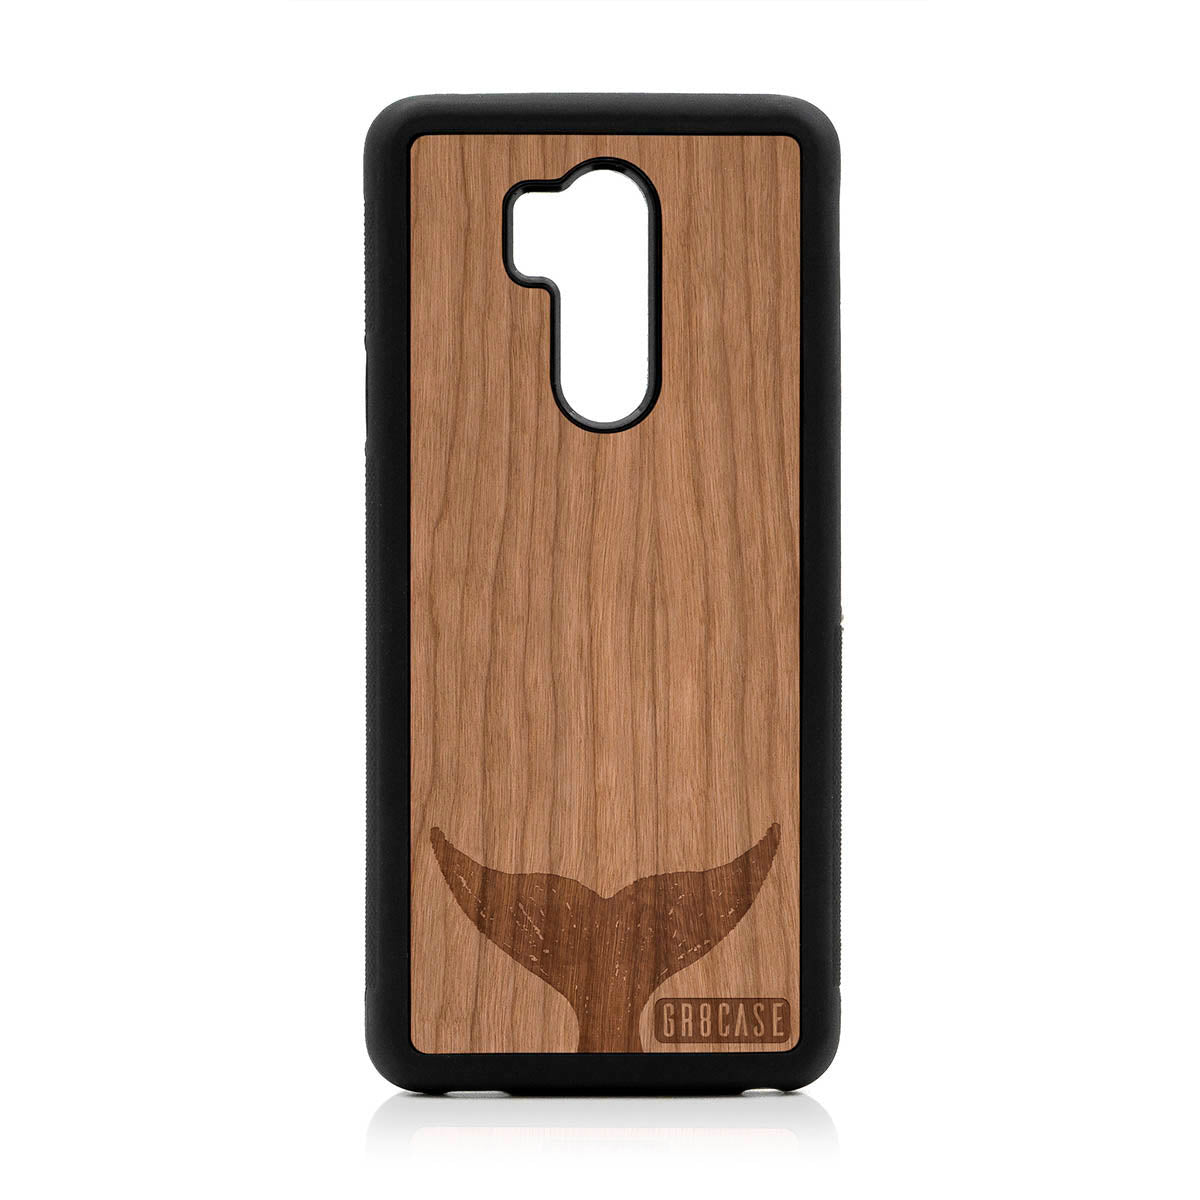 Whale Tail Design Wood Case For LG G7 ThinQ